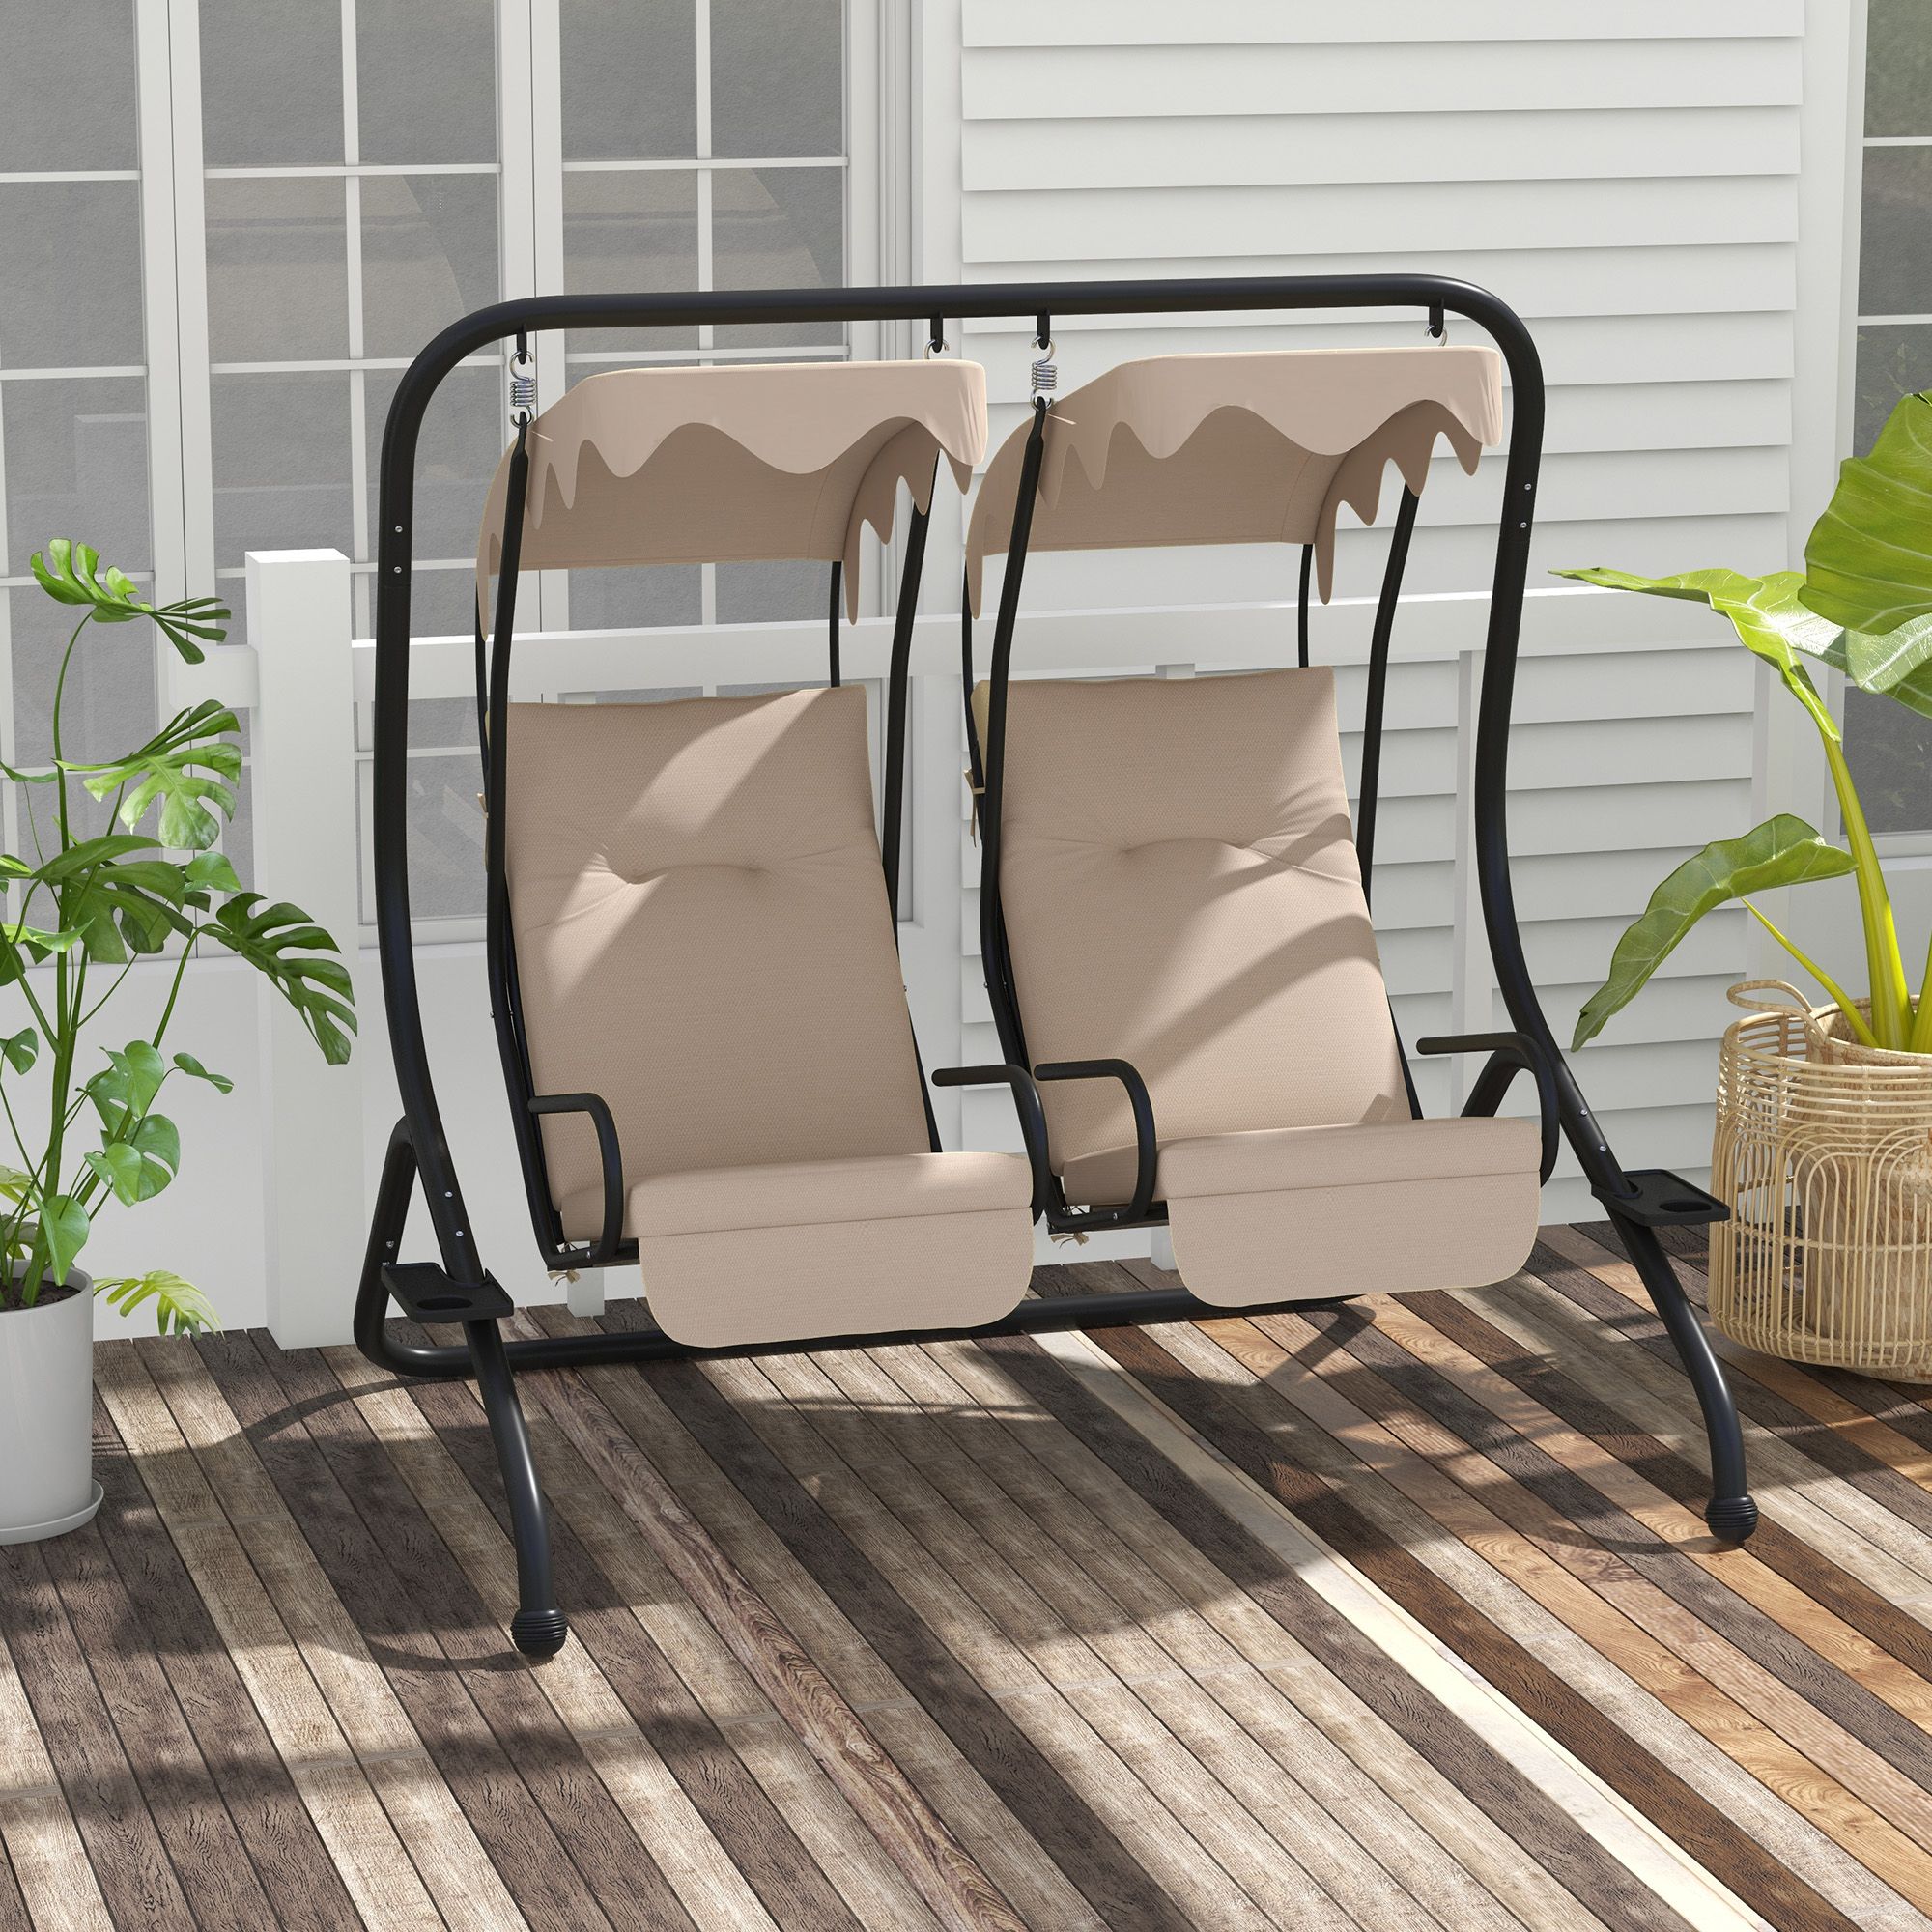 Outsunny Canopy Swing Chair Modern Garden Swing Seat Outdoor Relax Chairs W/ 2 Separate Chairs, Cushions And Removable Shade Canopy, Beige